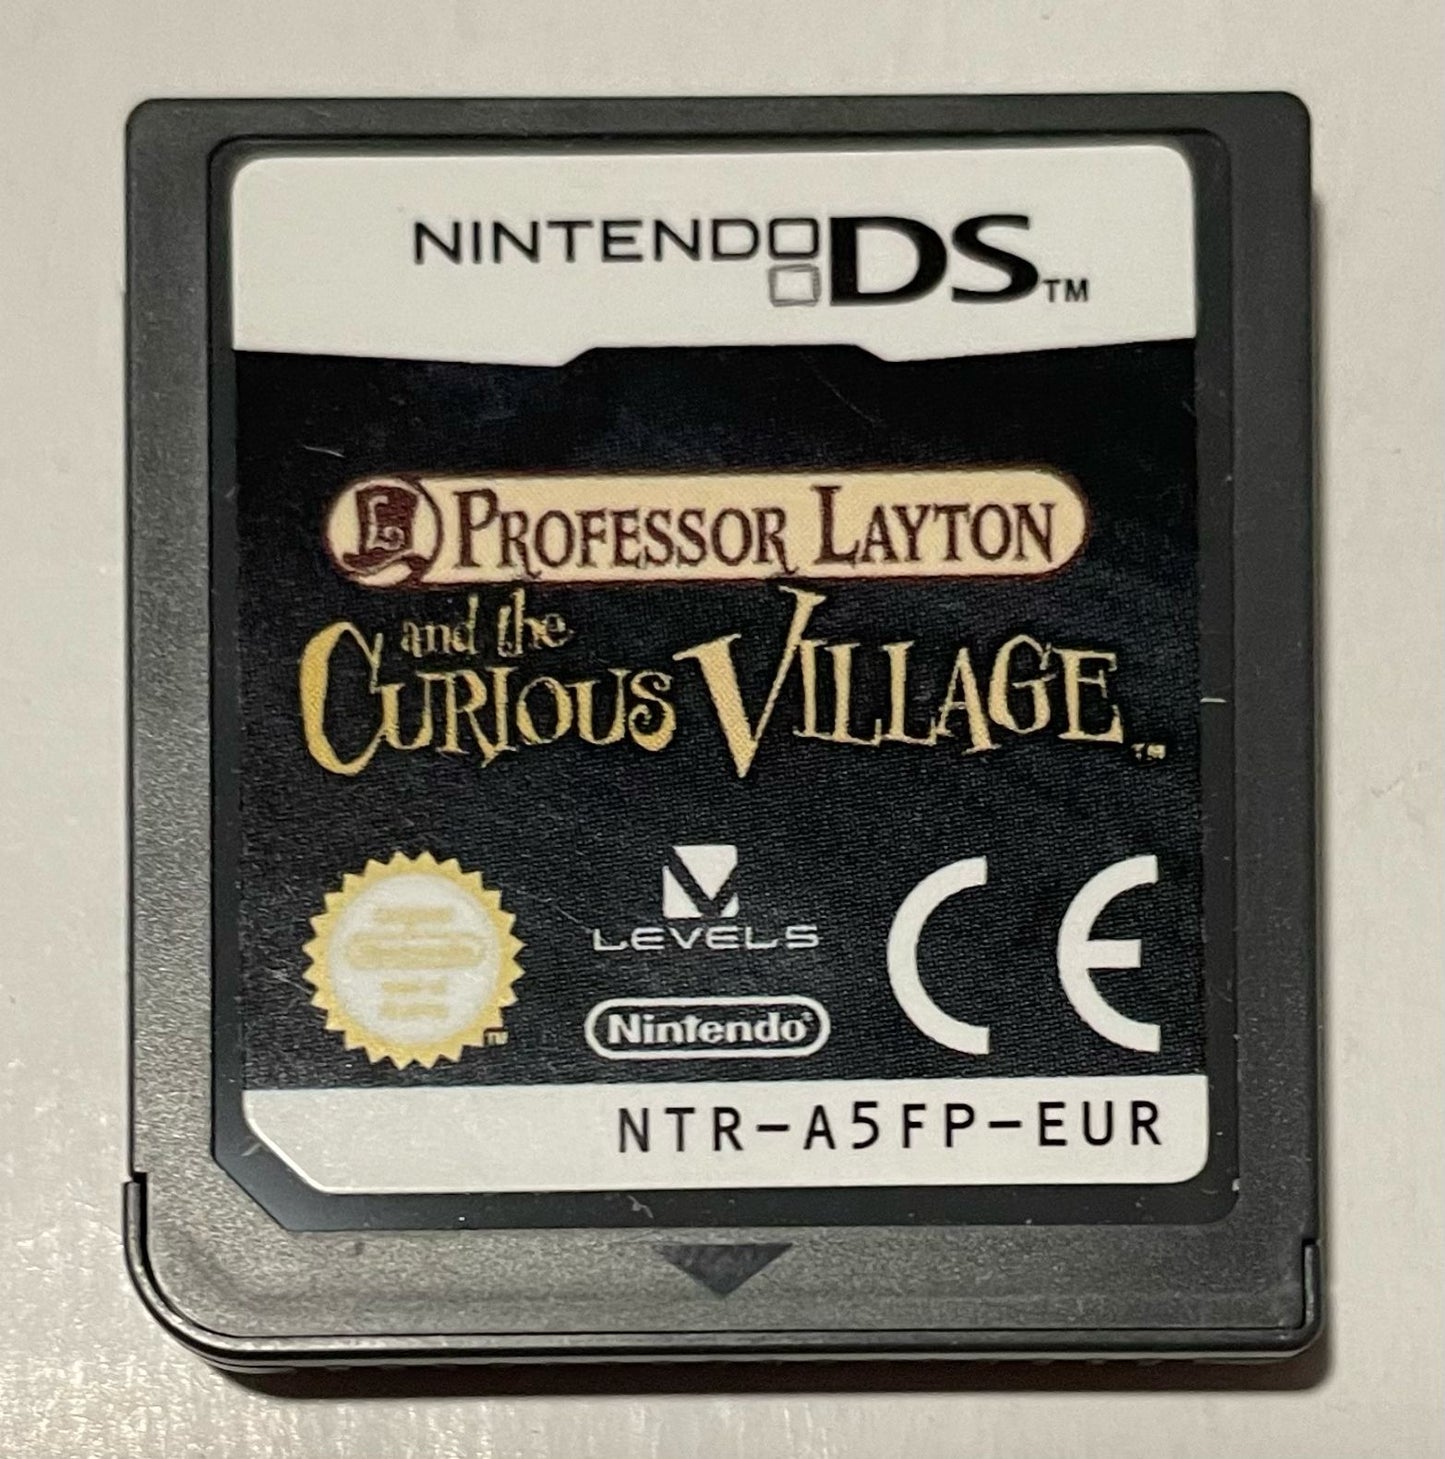 Professor Layton and the Curious Village DS